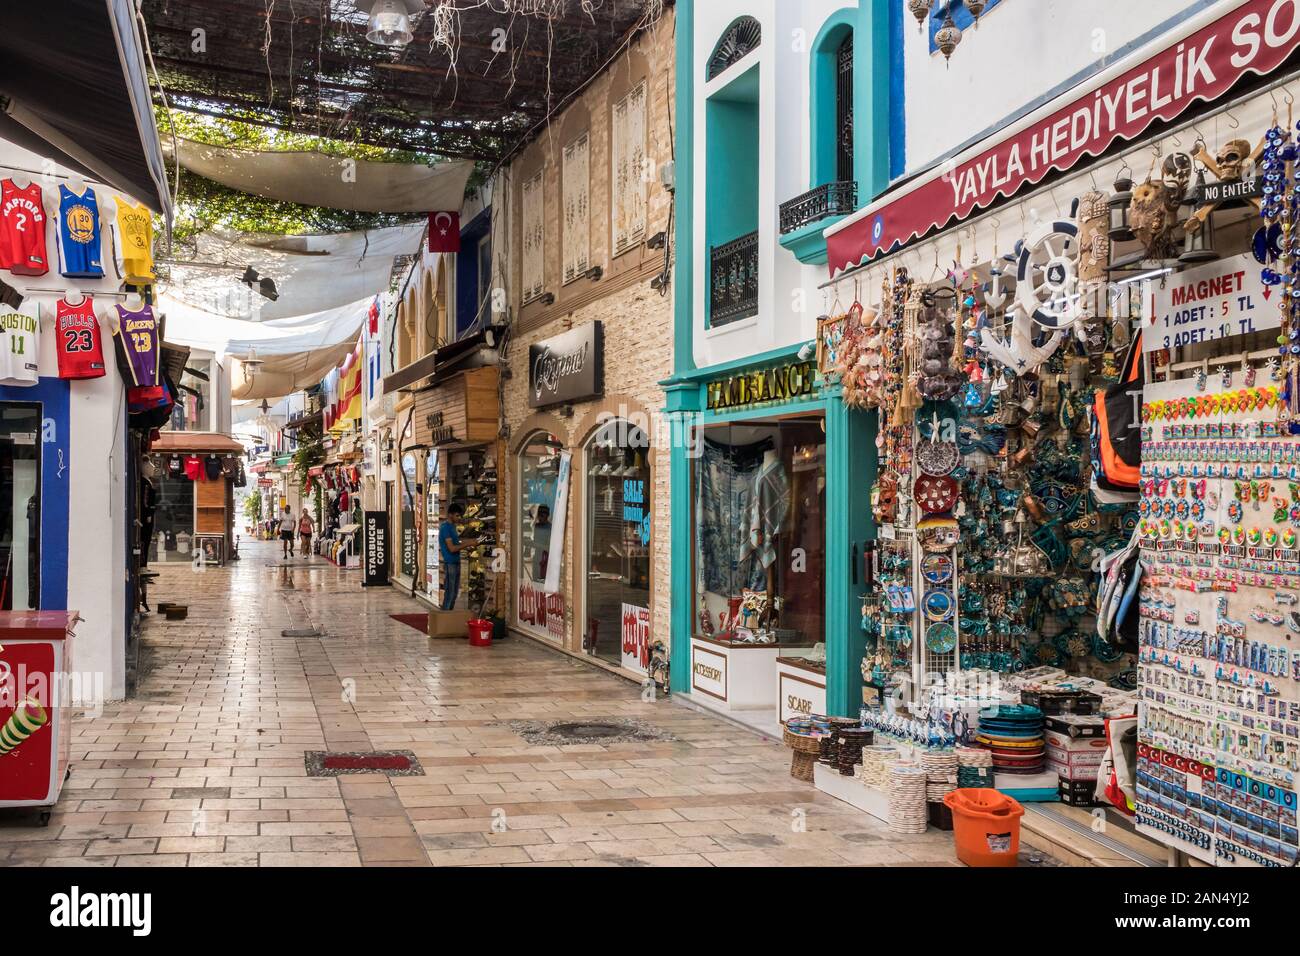 Bodrum, Turkey - September 15th 2019: Pedestrian street in the tourist area. SHops sell souvenirs and gifts to tourists. Stock Photo